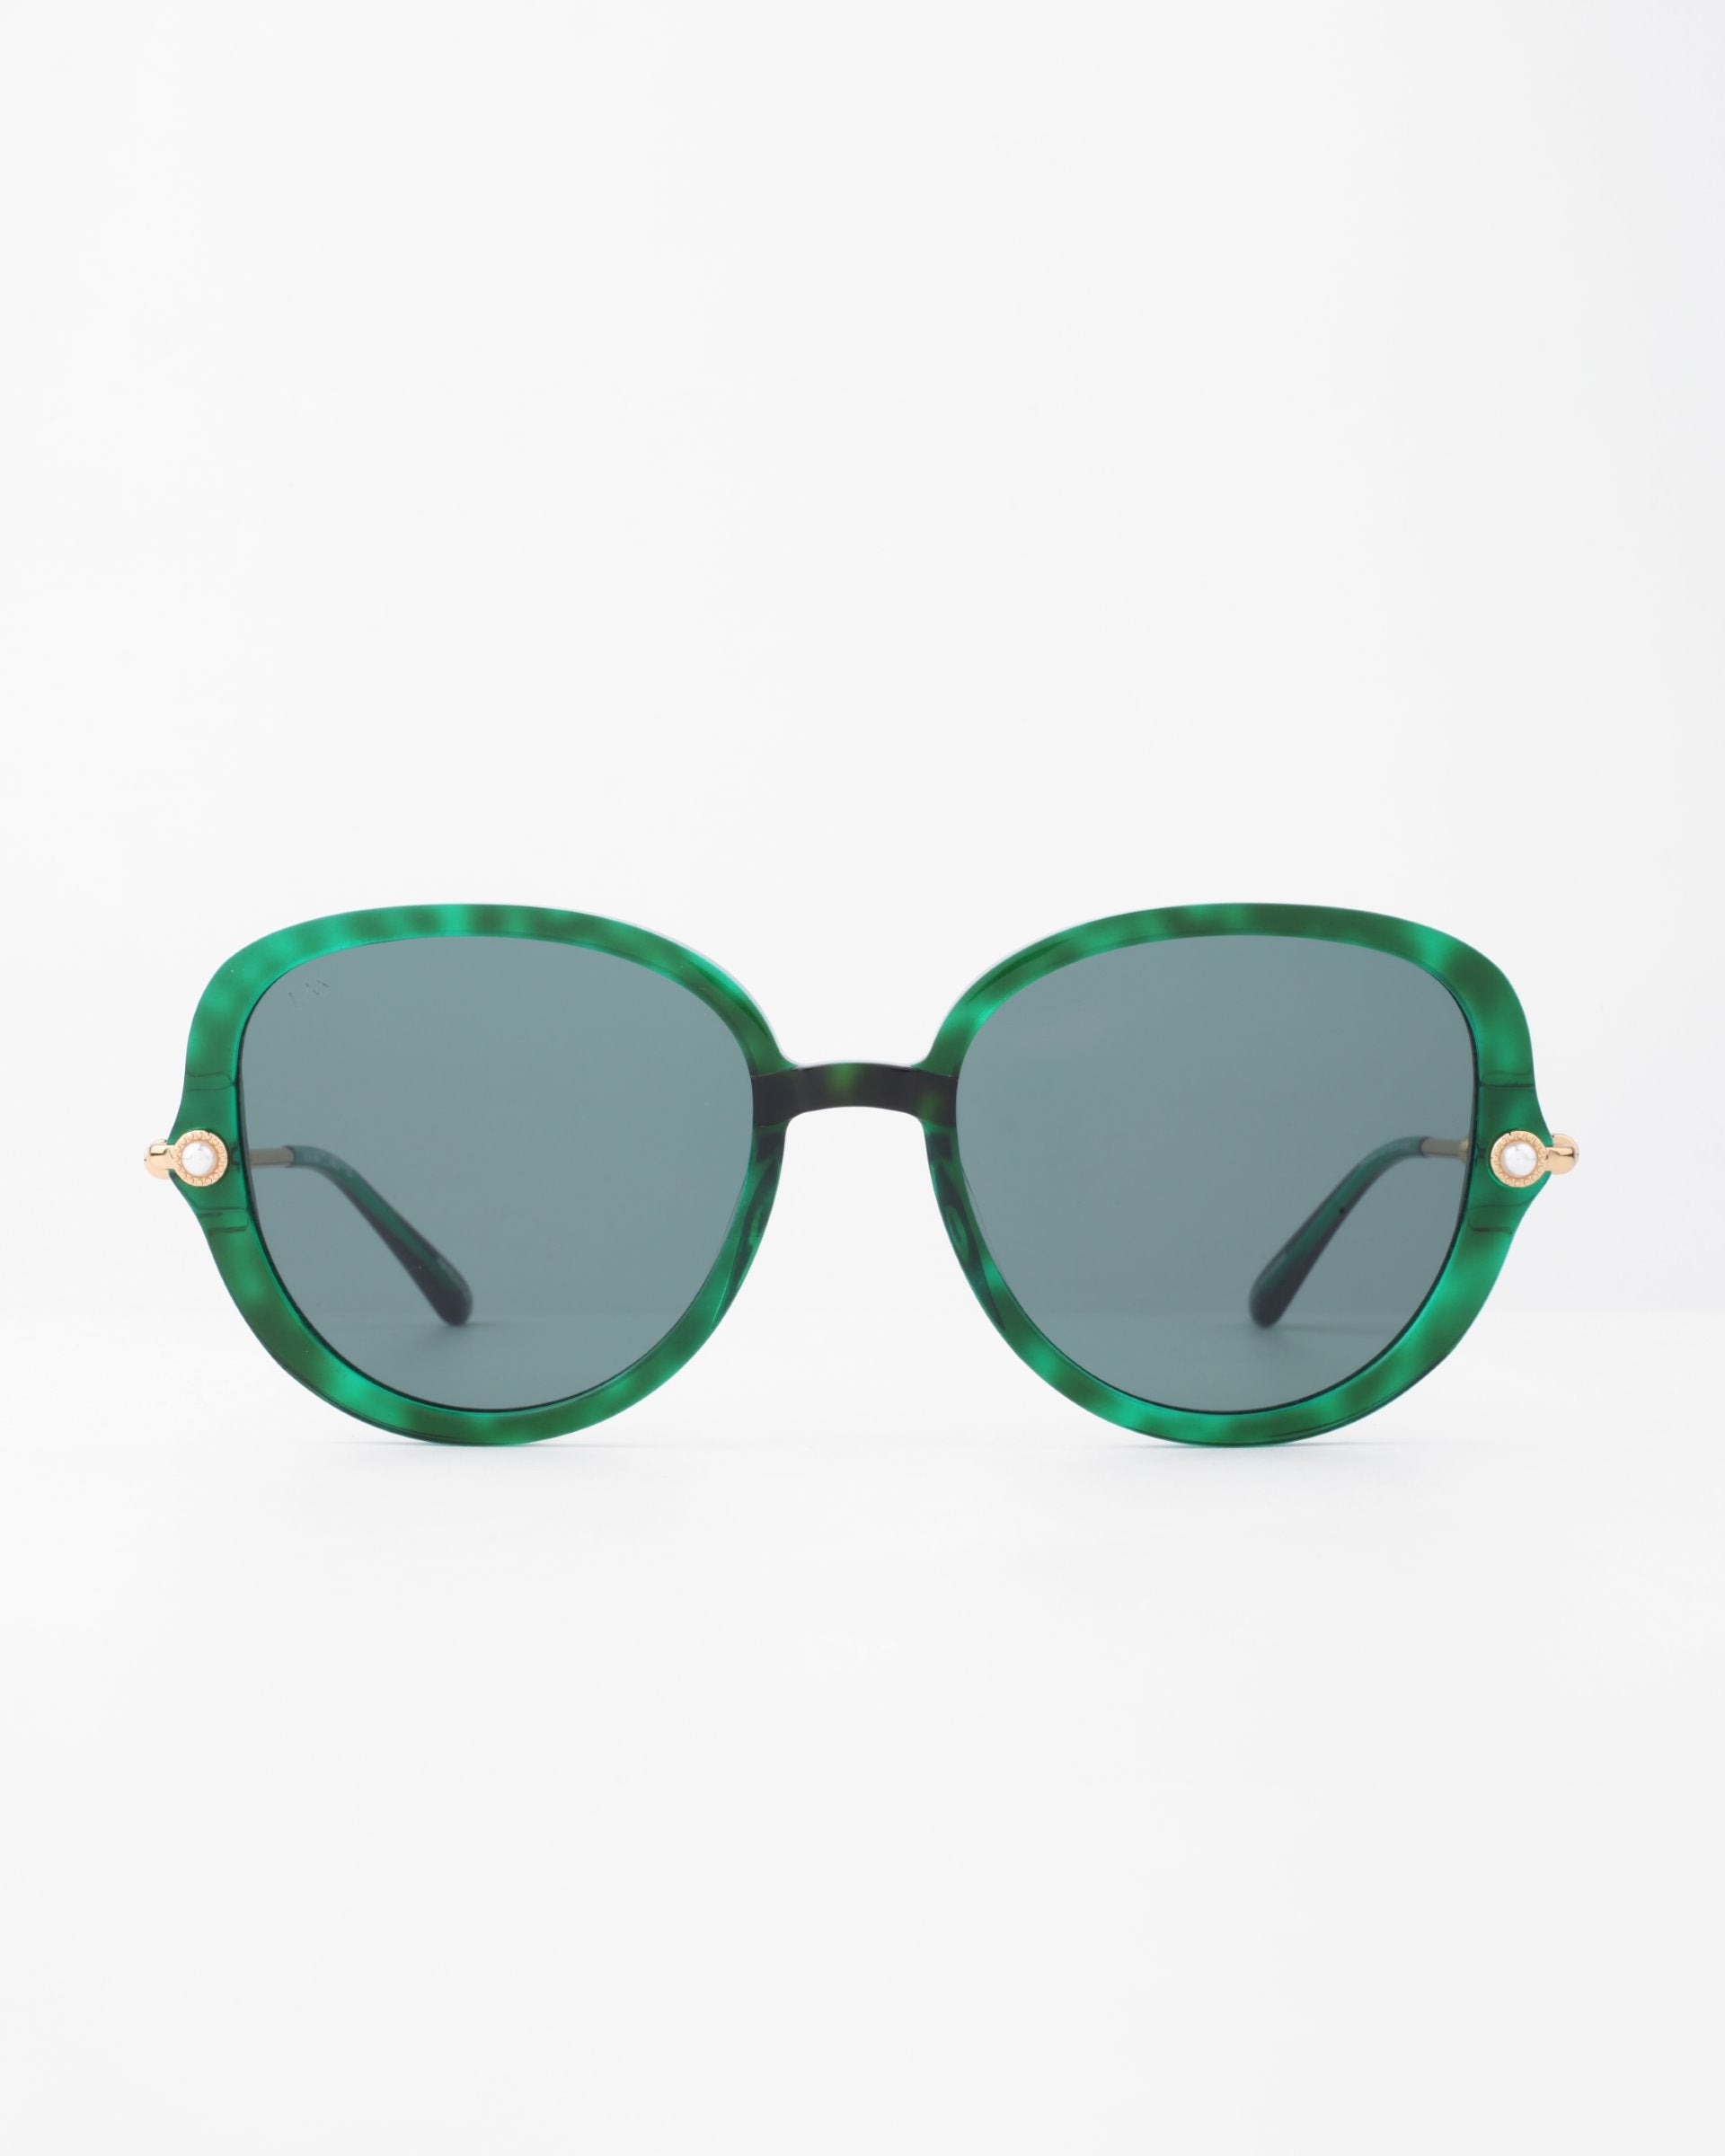 A pair of stylish green round sunglasses with dark tinted lenses are centered against a plain white background. The Primrose sunglasses by For Art&#39;s Sake® have gold accents on the hinges, adding a touch of elegance, and feature a plant-based acetate frame for an eco-friendly twist.